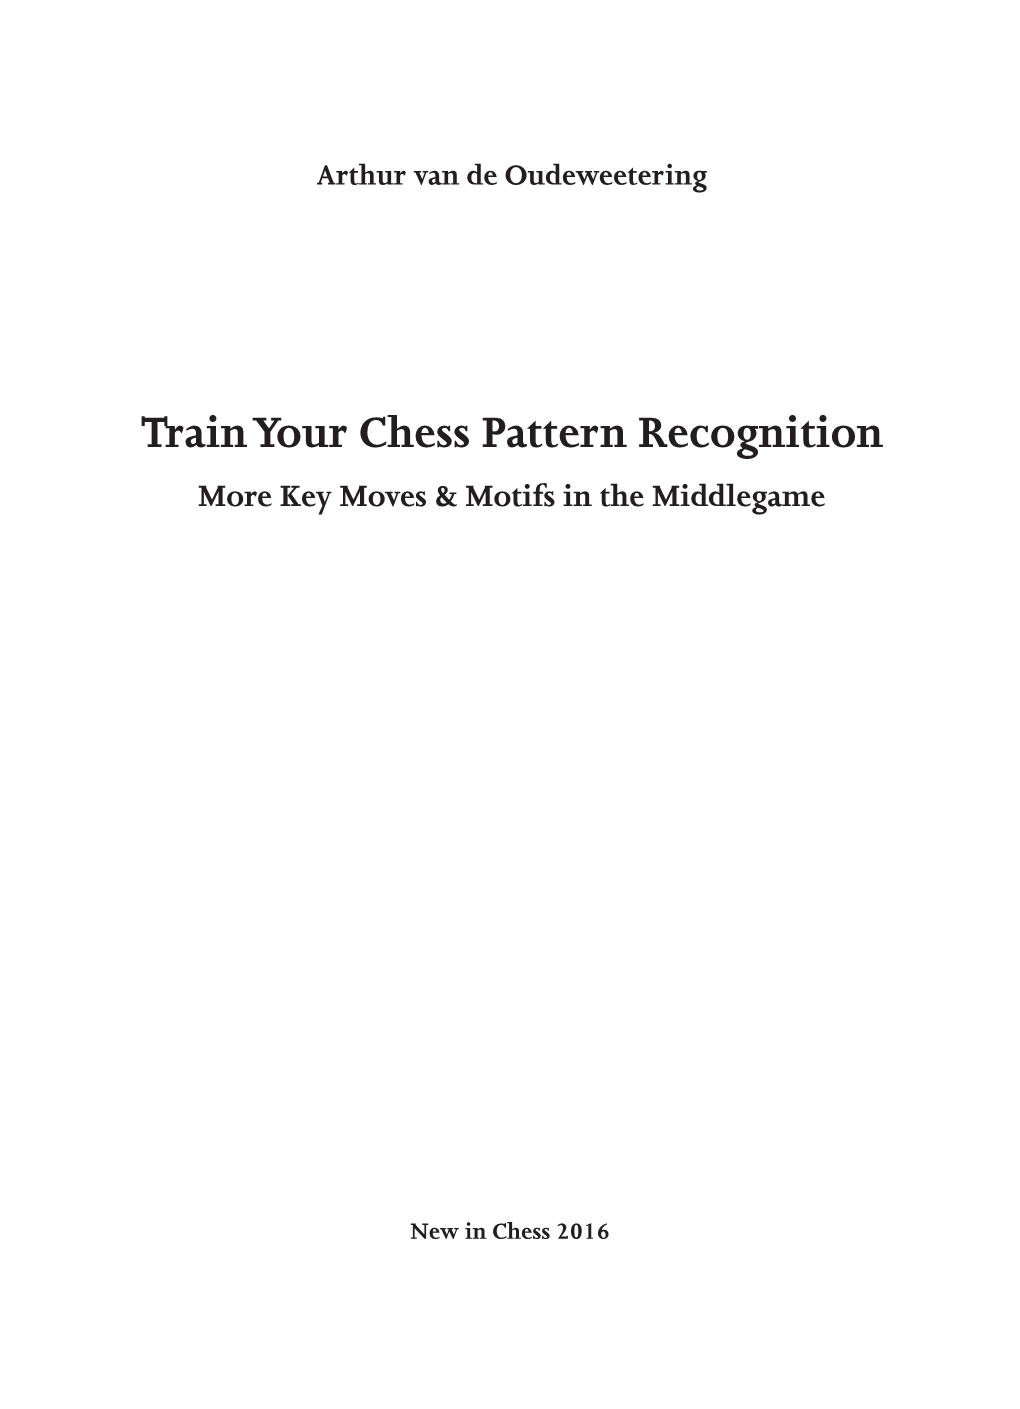 Train Your Chess Pattern Recognition More Key Moves & Motifs in the Middlegame